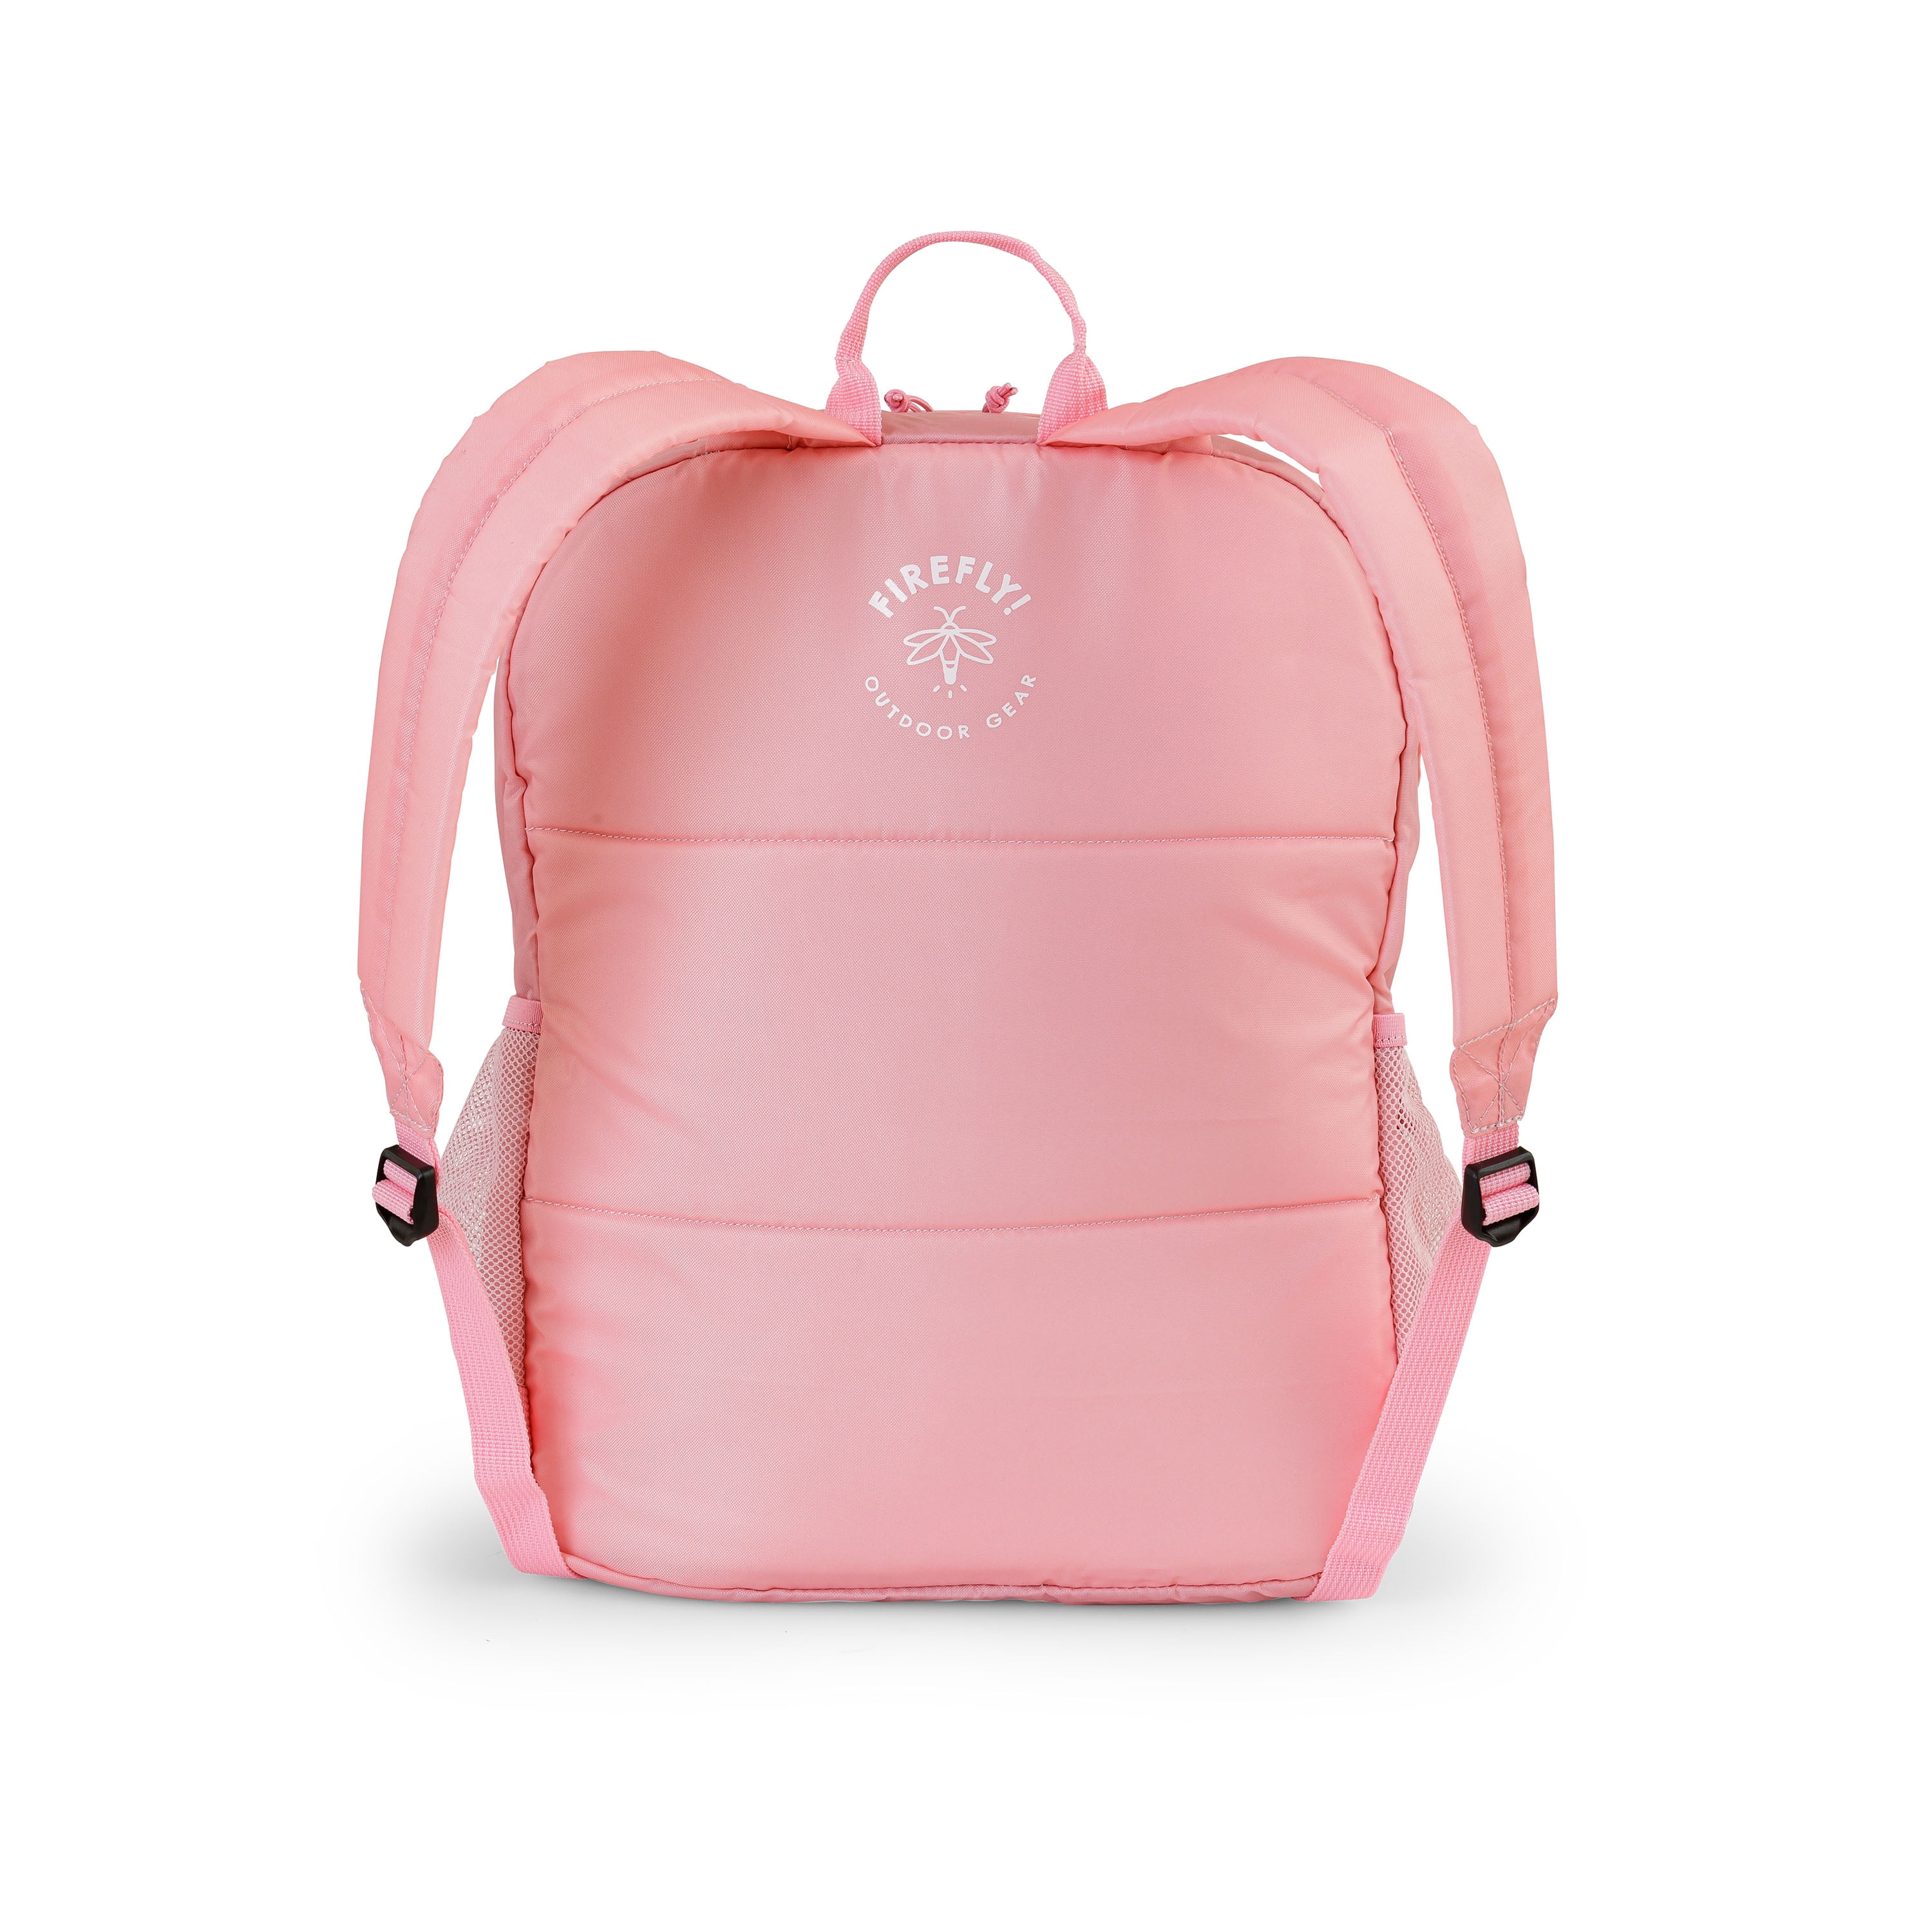 Blushing Llama Backpack in White – T-Shirt & Jeans